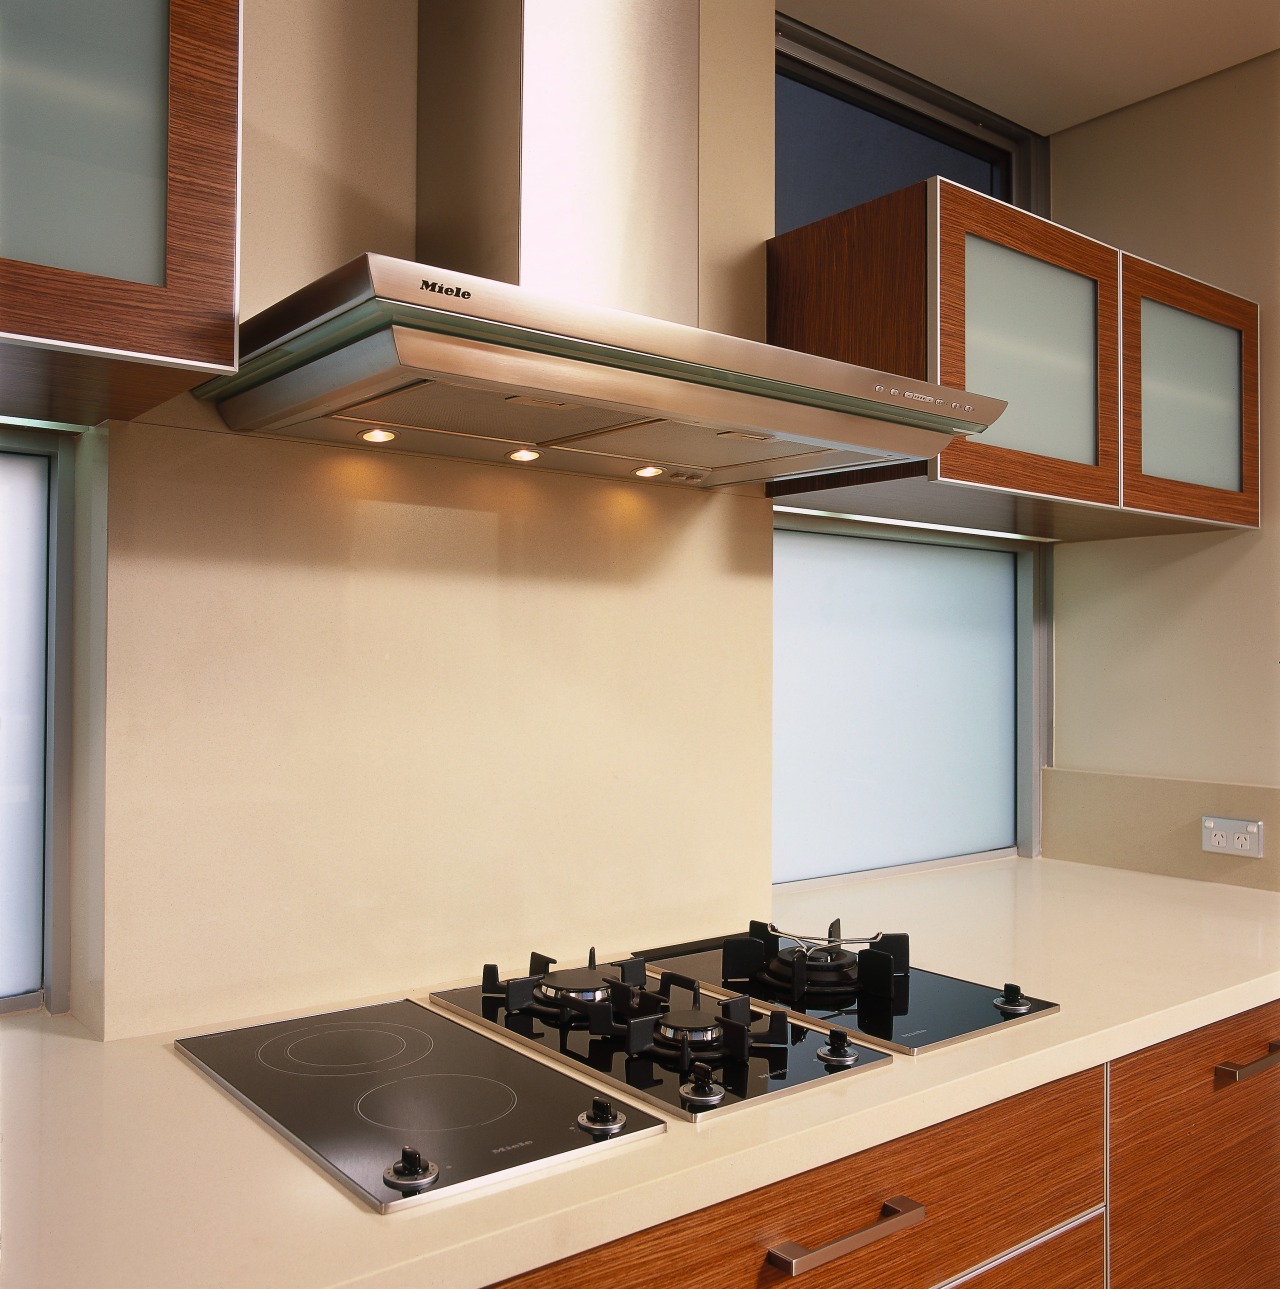 view of this this miele gas wok burner cabinetry, countertop, glass, interior design, kitchen, under cabinet lighting, orange, brown